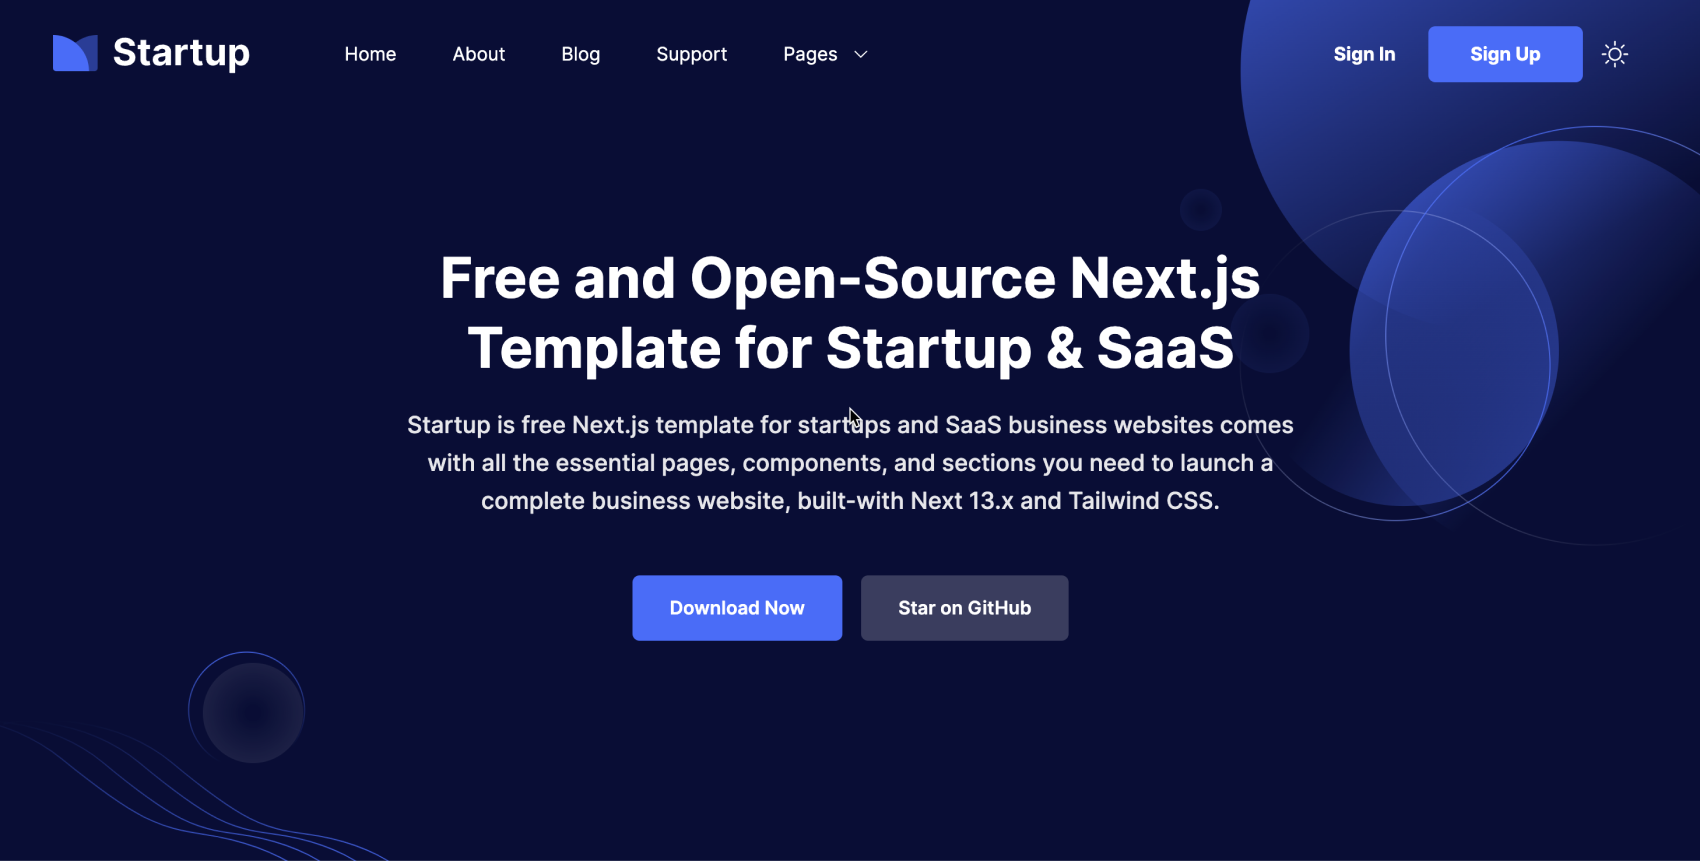 Startup - Free Next.js Startup and SaaS Website Template